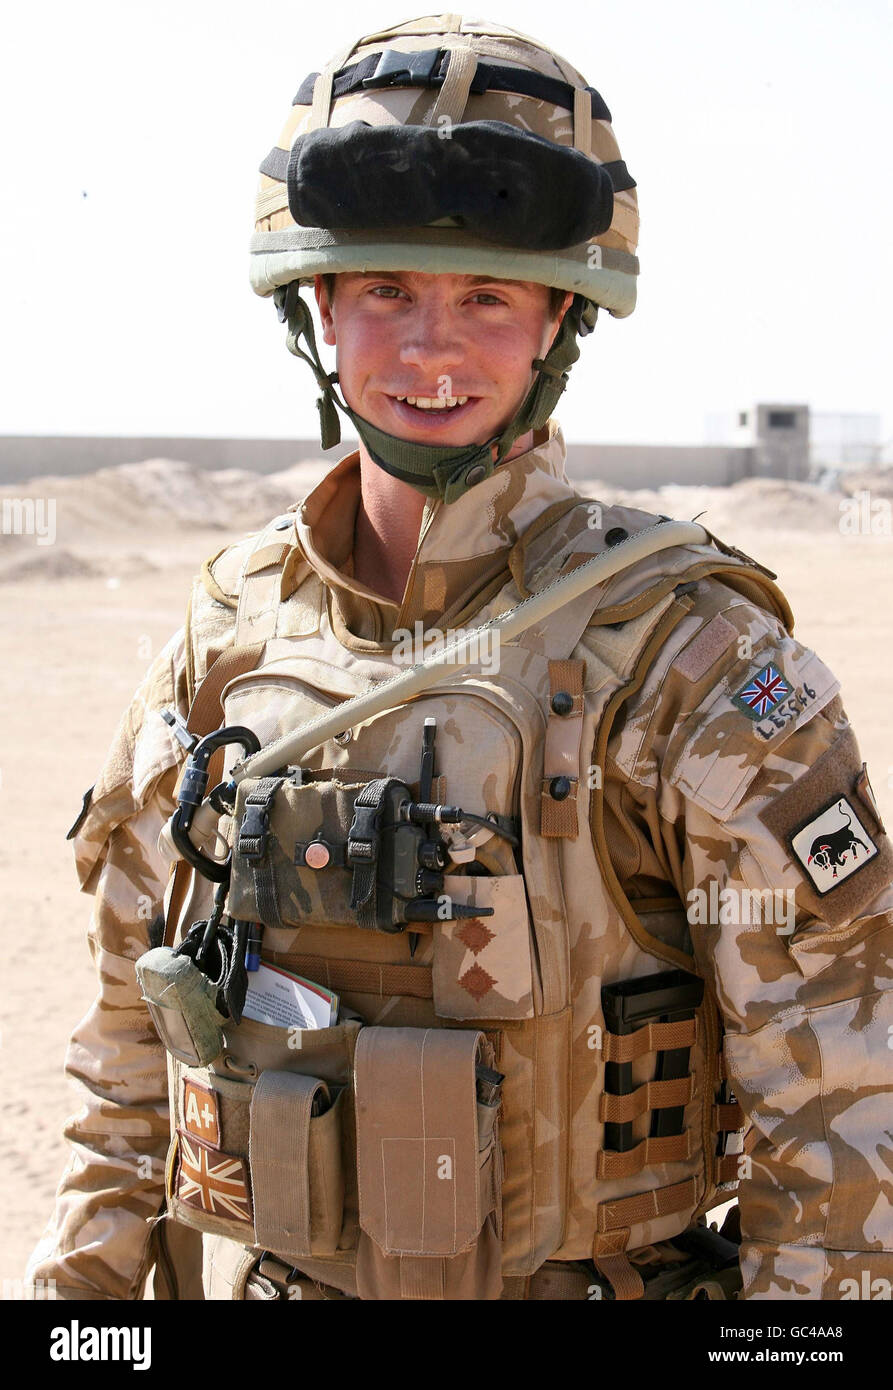 Lt. Paul Lewsey from Bashtead in Surrey, during a training exercise to search for improvised explosive devices (IEDs) at Camp Bastion in Afghanistan. Stock Photo